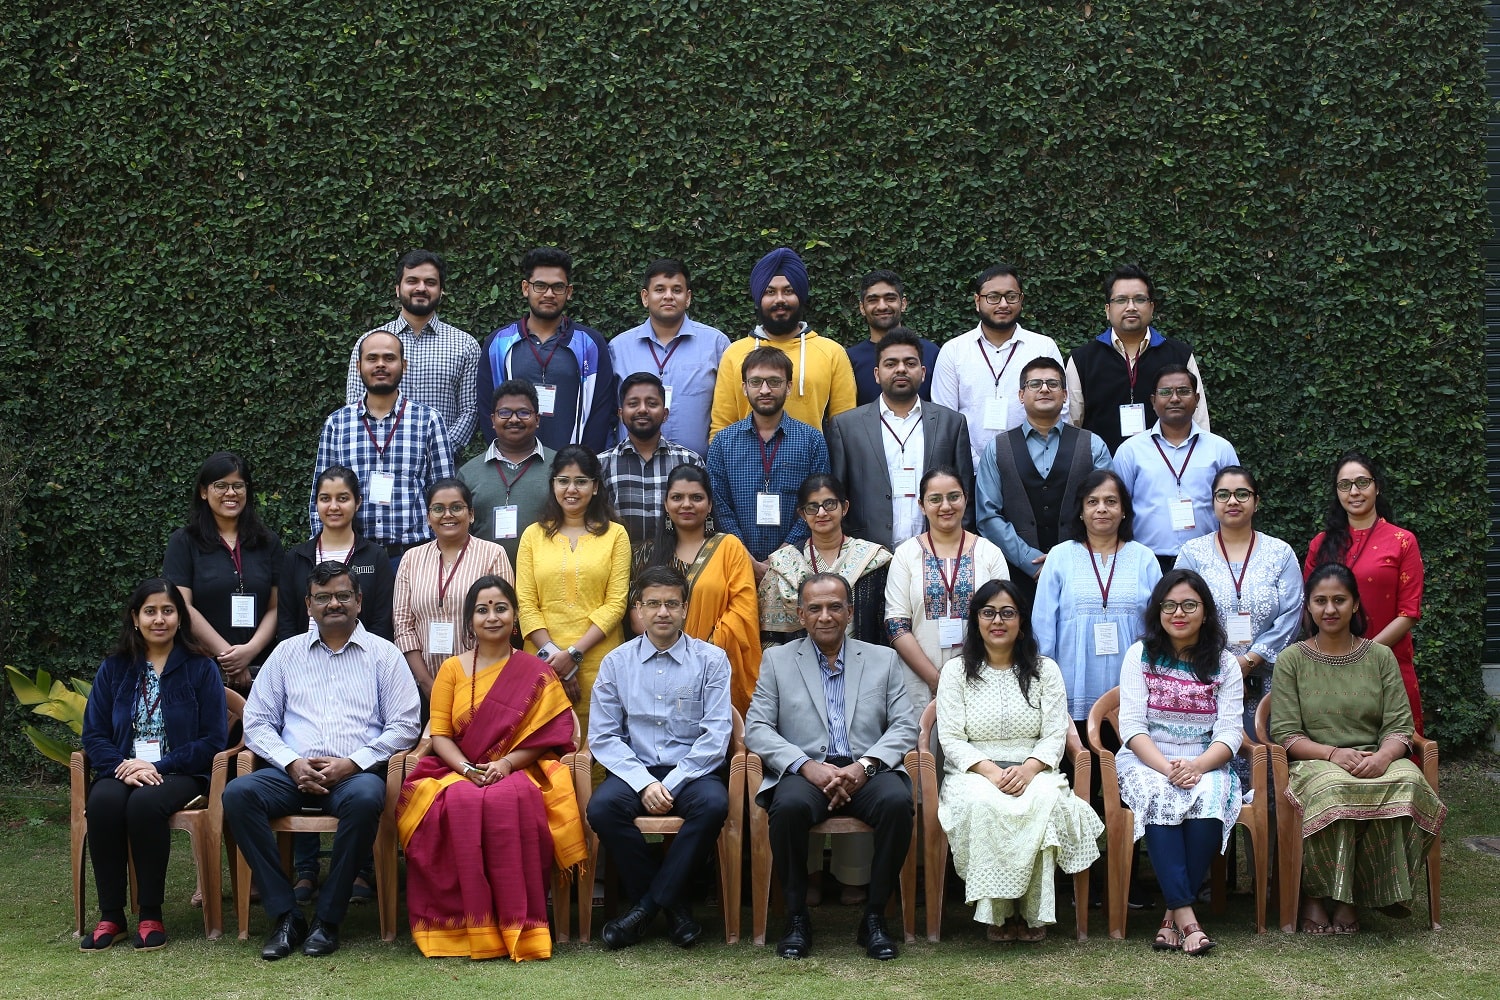 Group photo of the CTL conference participants with the Programme Directors, Prof. Sourav Mukherji (4th from left) and Dr. Arun Pereira (5th from left) and the CTL team.